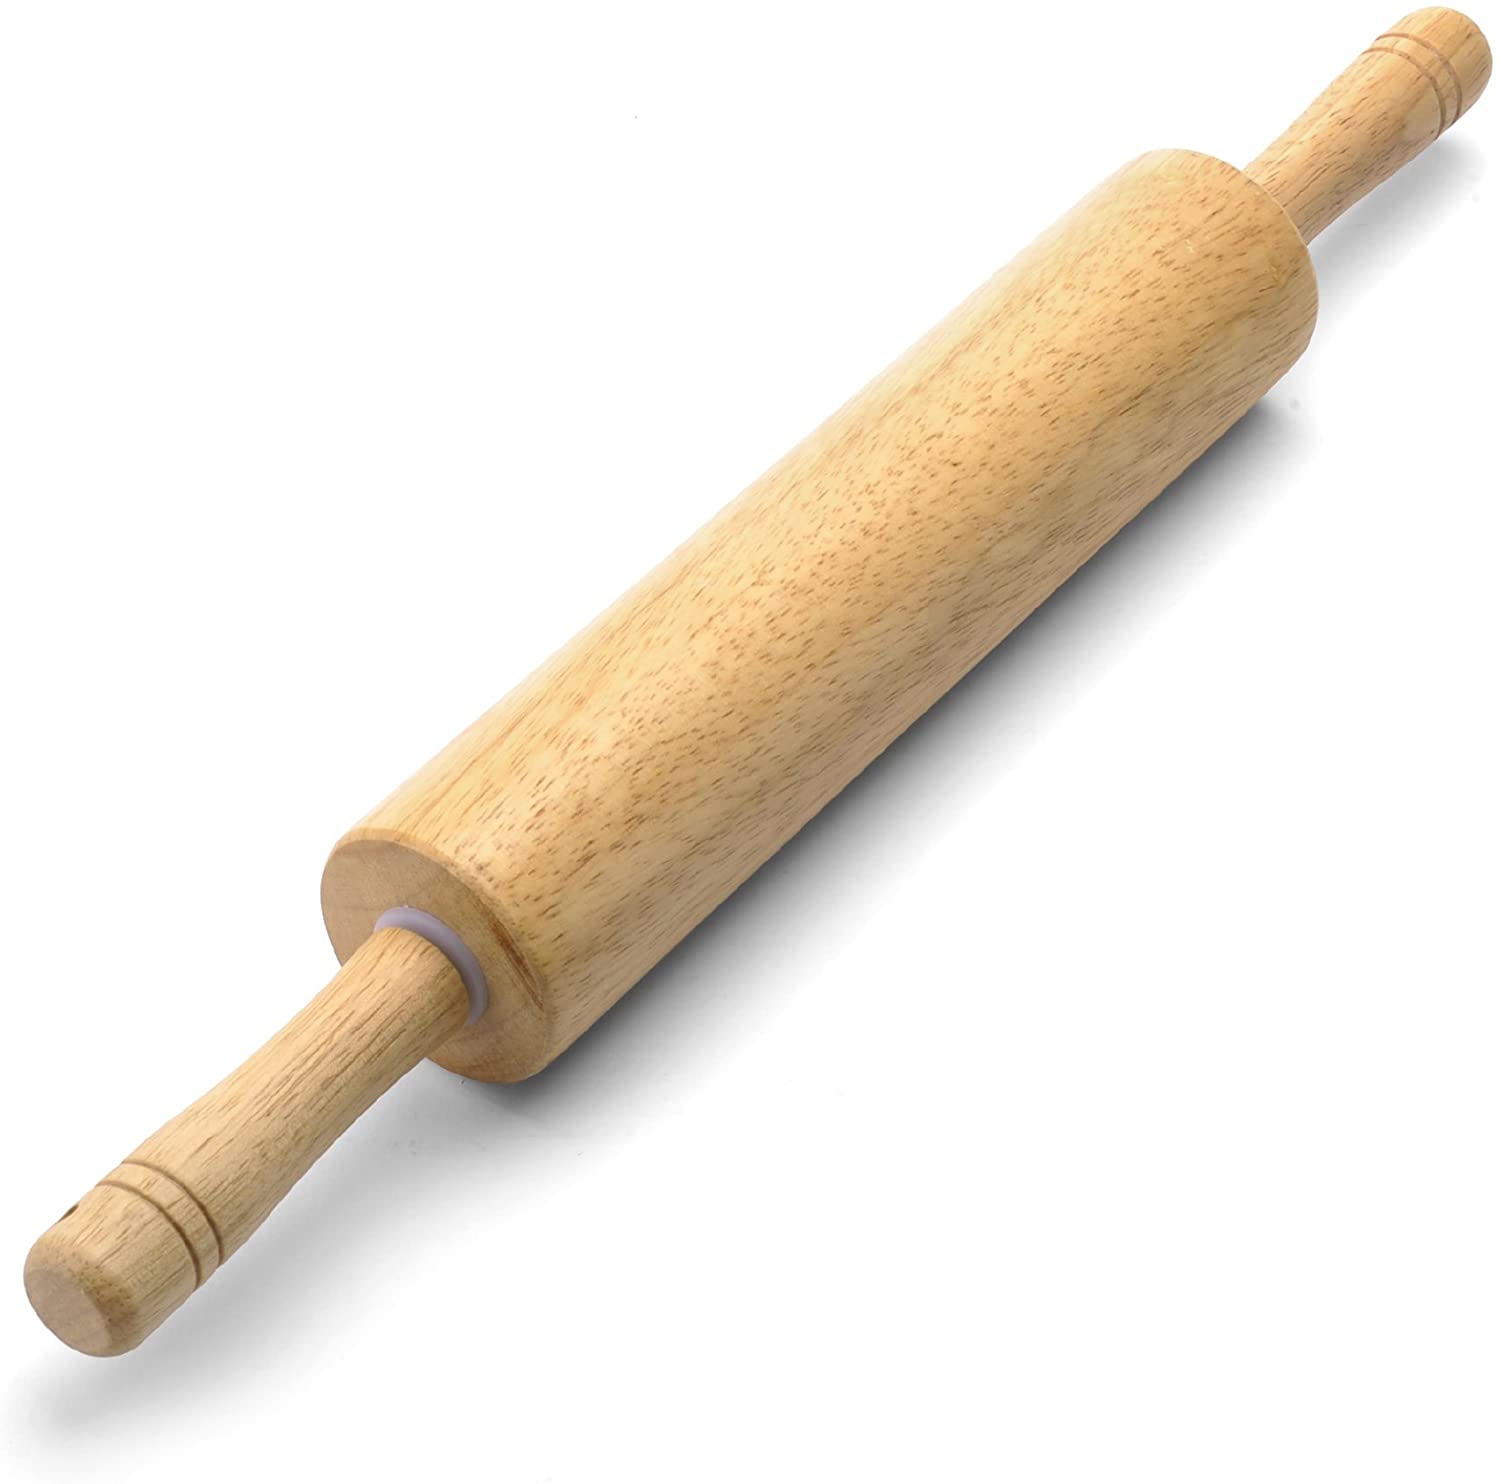 12" Wood Rod Rolling Pin Wooden Handle Silicone Pressure Roller Baking Essential 